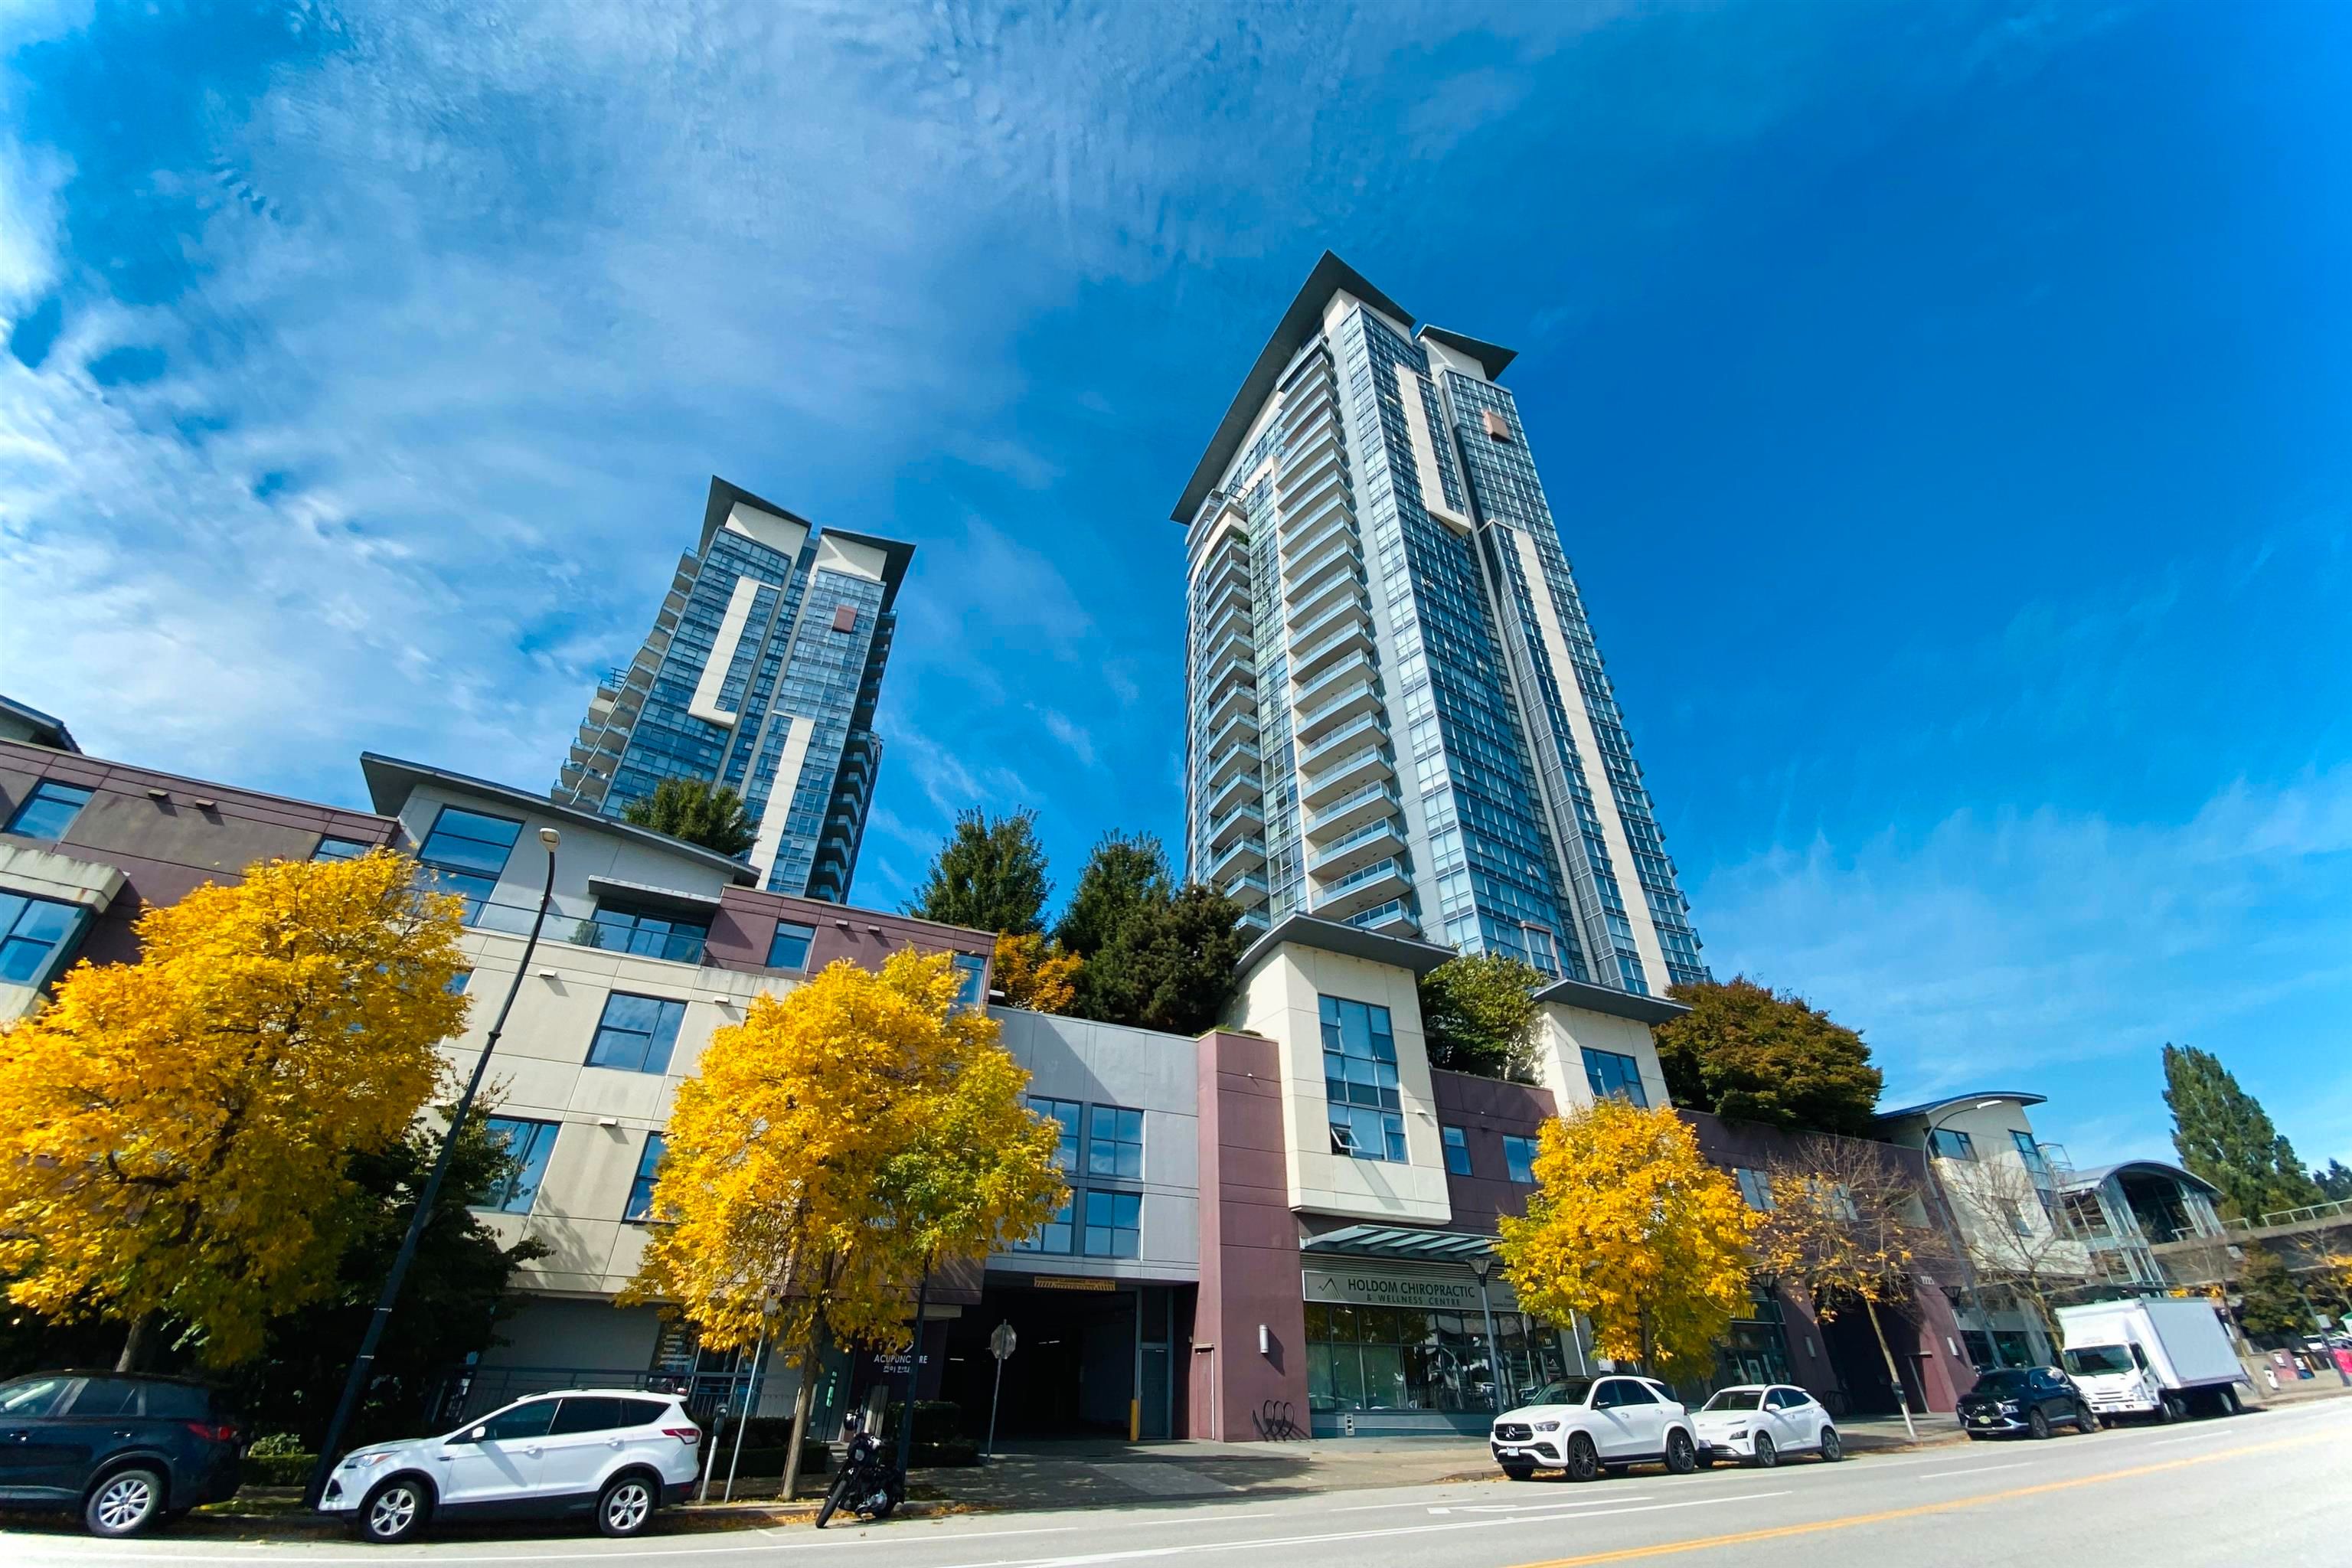 Main Photo: 1104 2225 HOLDOM Avenue in Burnaby: Central BN Condo for sale (Burnaby North)  : MLS®# R2621331